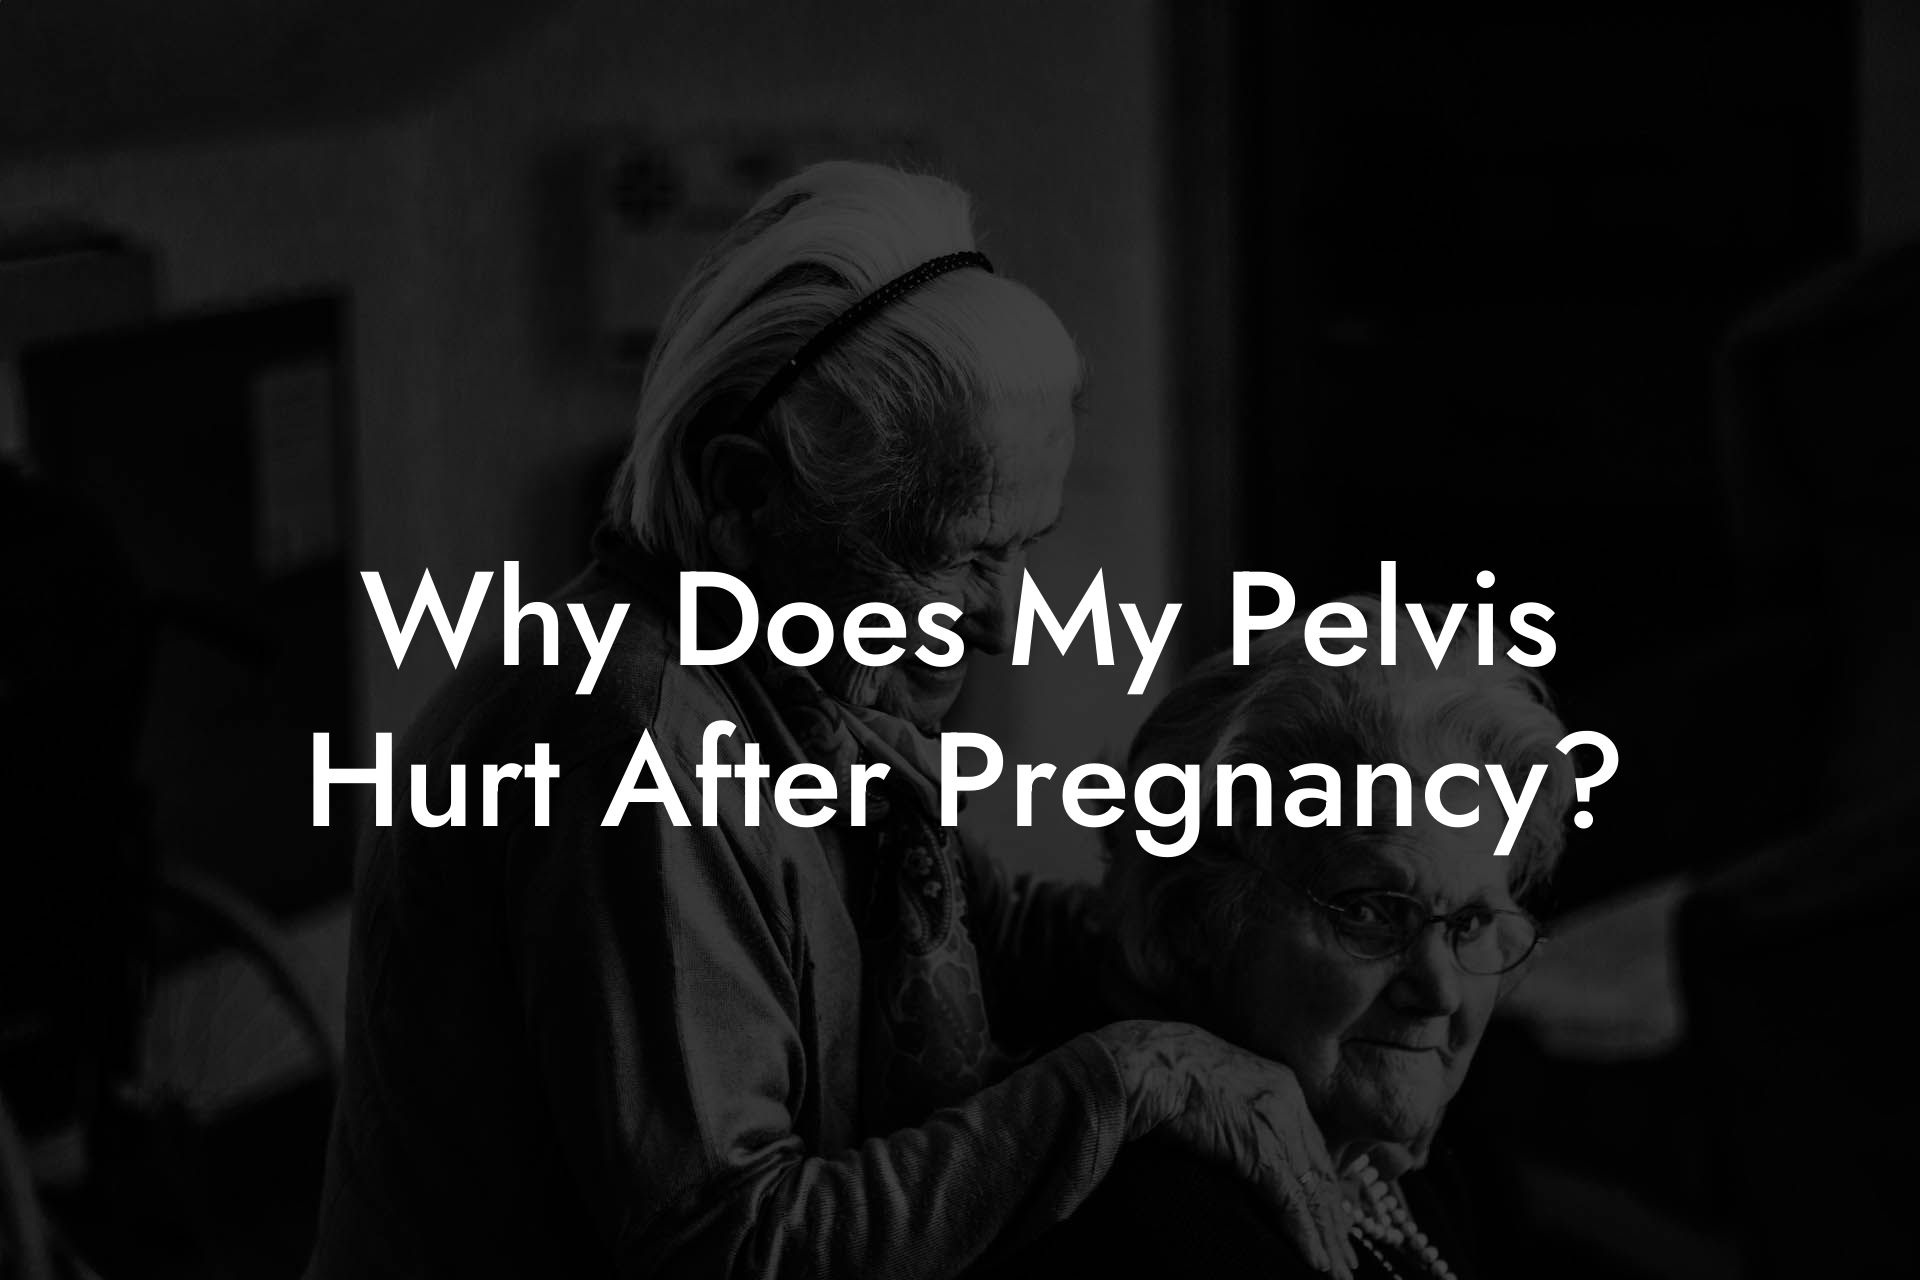 Why Does My Pelvis Hurt After Pregnancy?